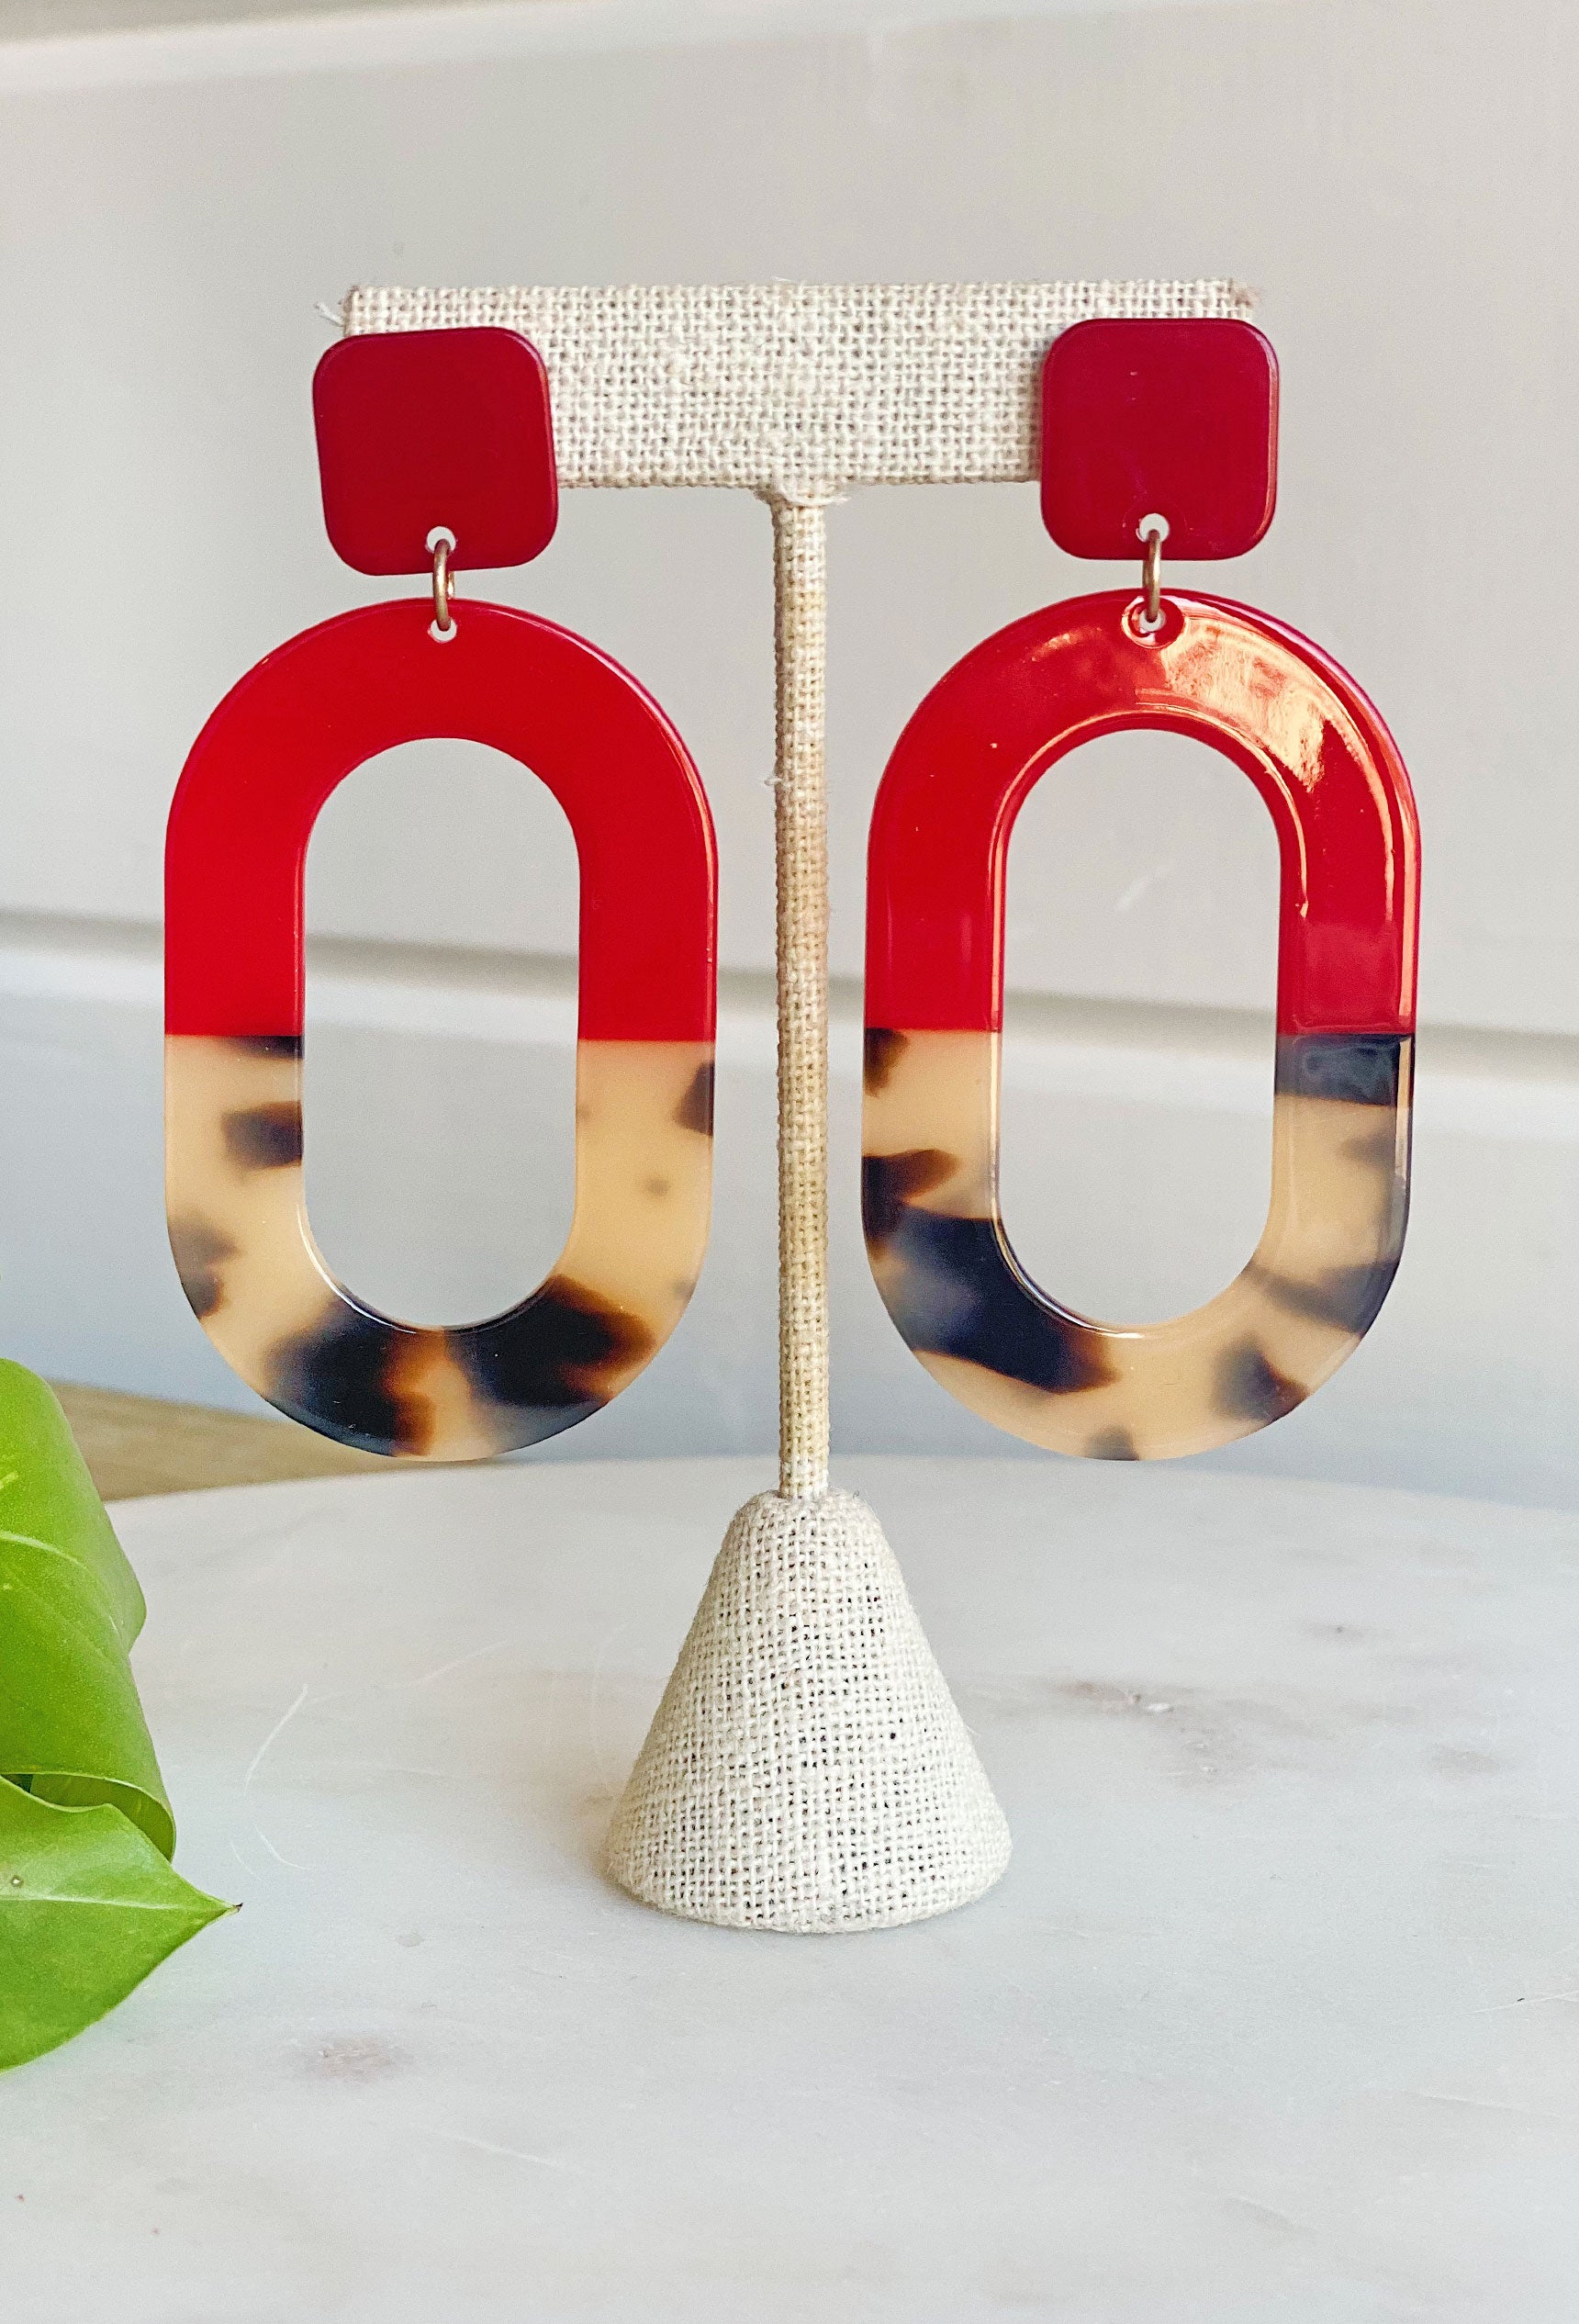 Madly in Love Earrings, hallow oval shape that's half red and half tortoise 